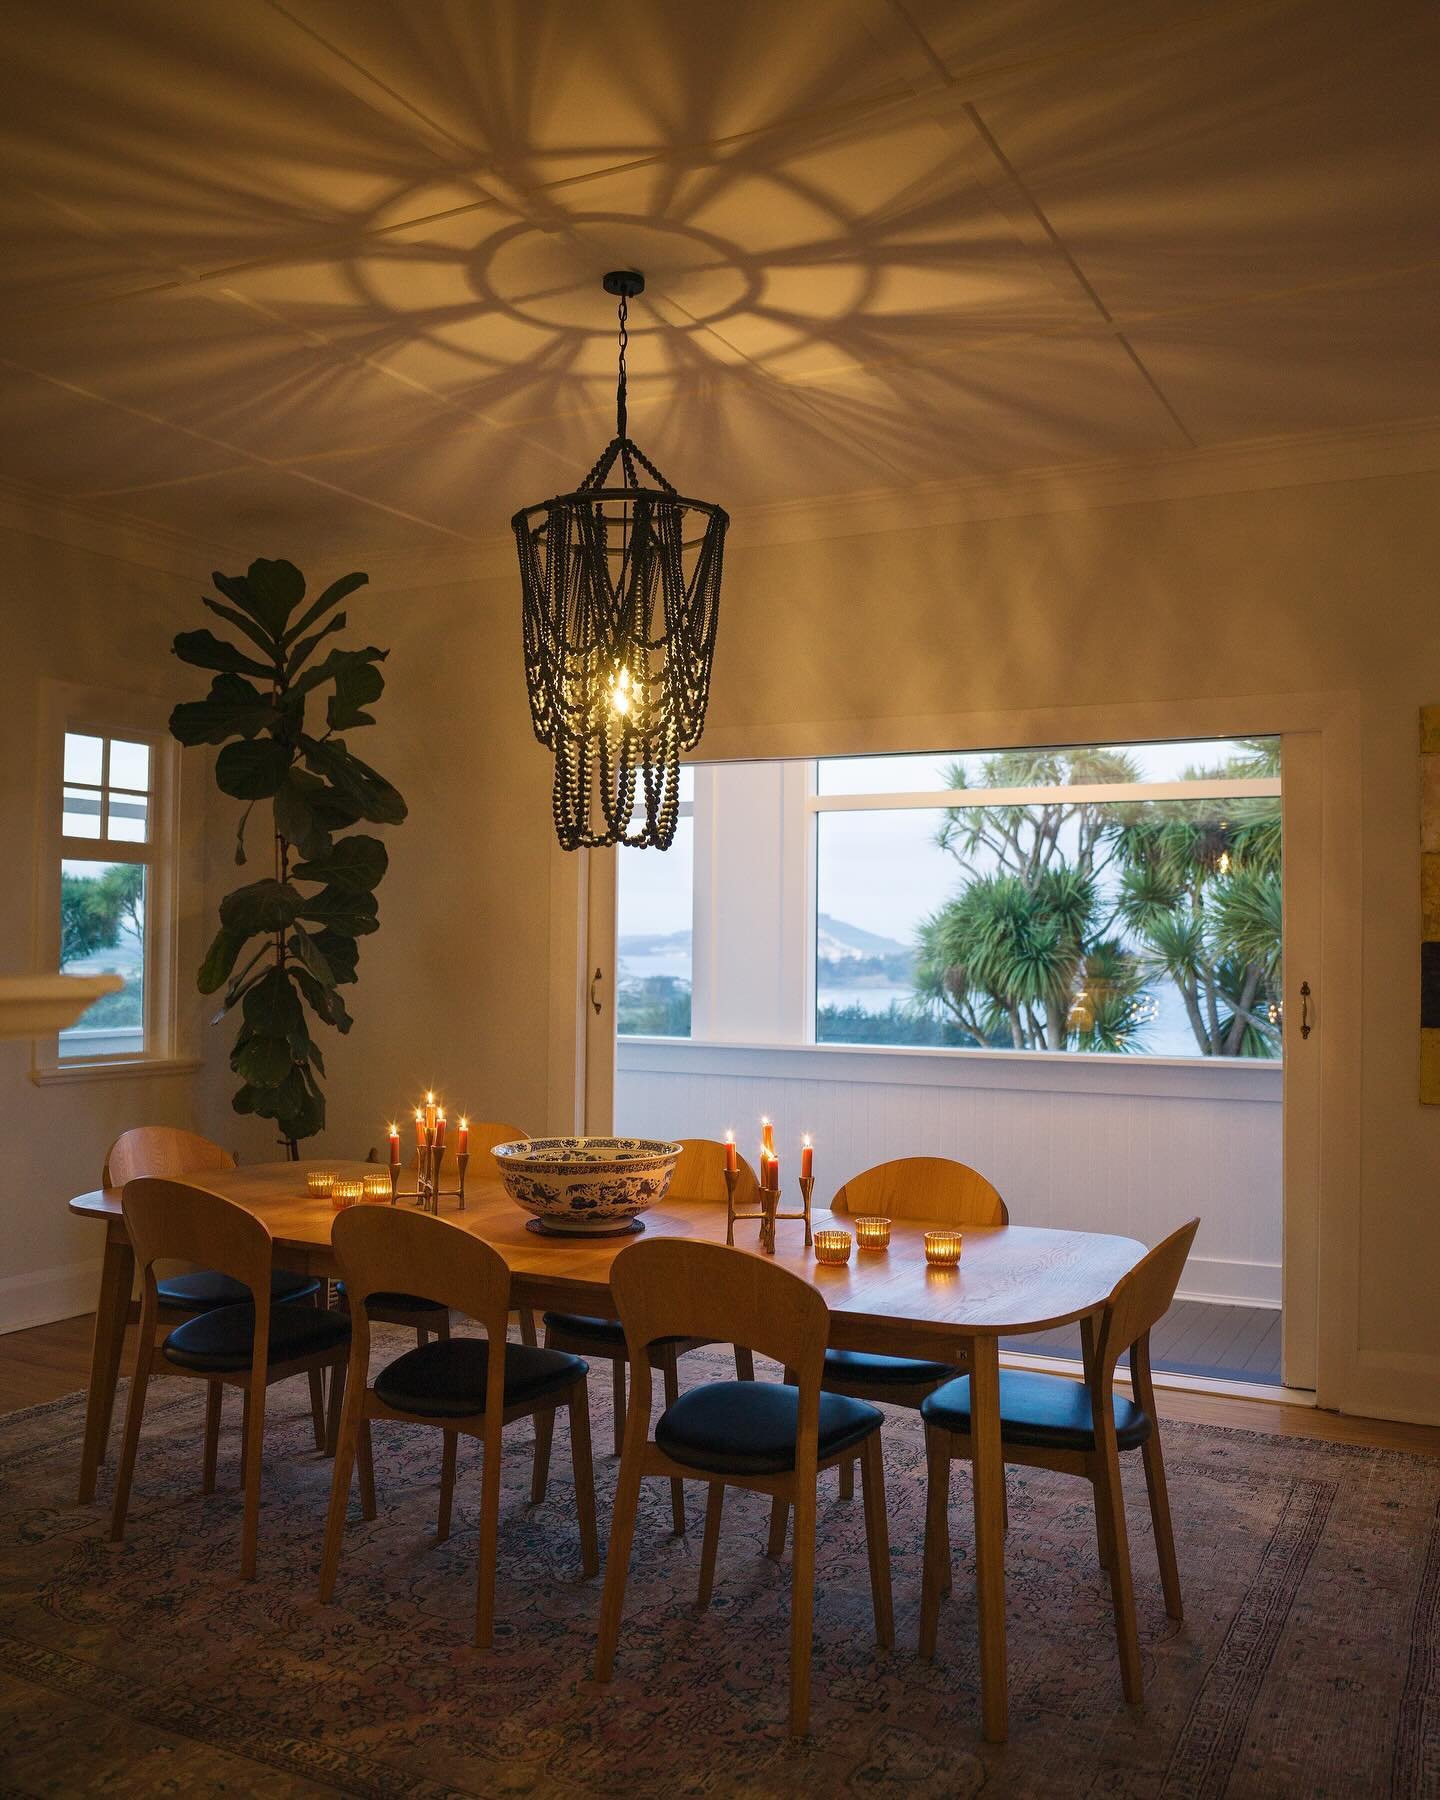 Our Dining room is perfect for a candlelit dinner for 2 ; a dinner with friends ; a celebration; retreat meal or elopement.  You choose. 

We love its womb-like calm at the centre of the house that allows us to share meals and connect mindfully to ou